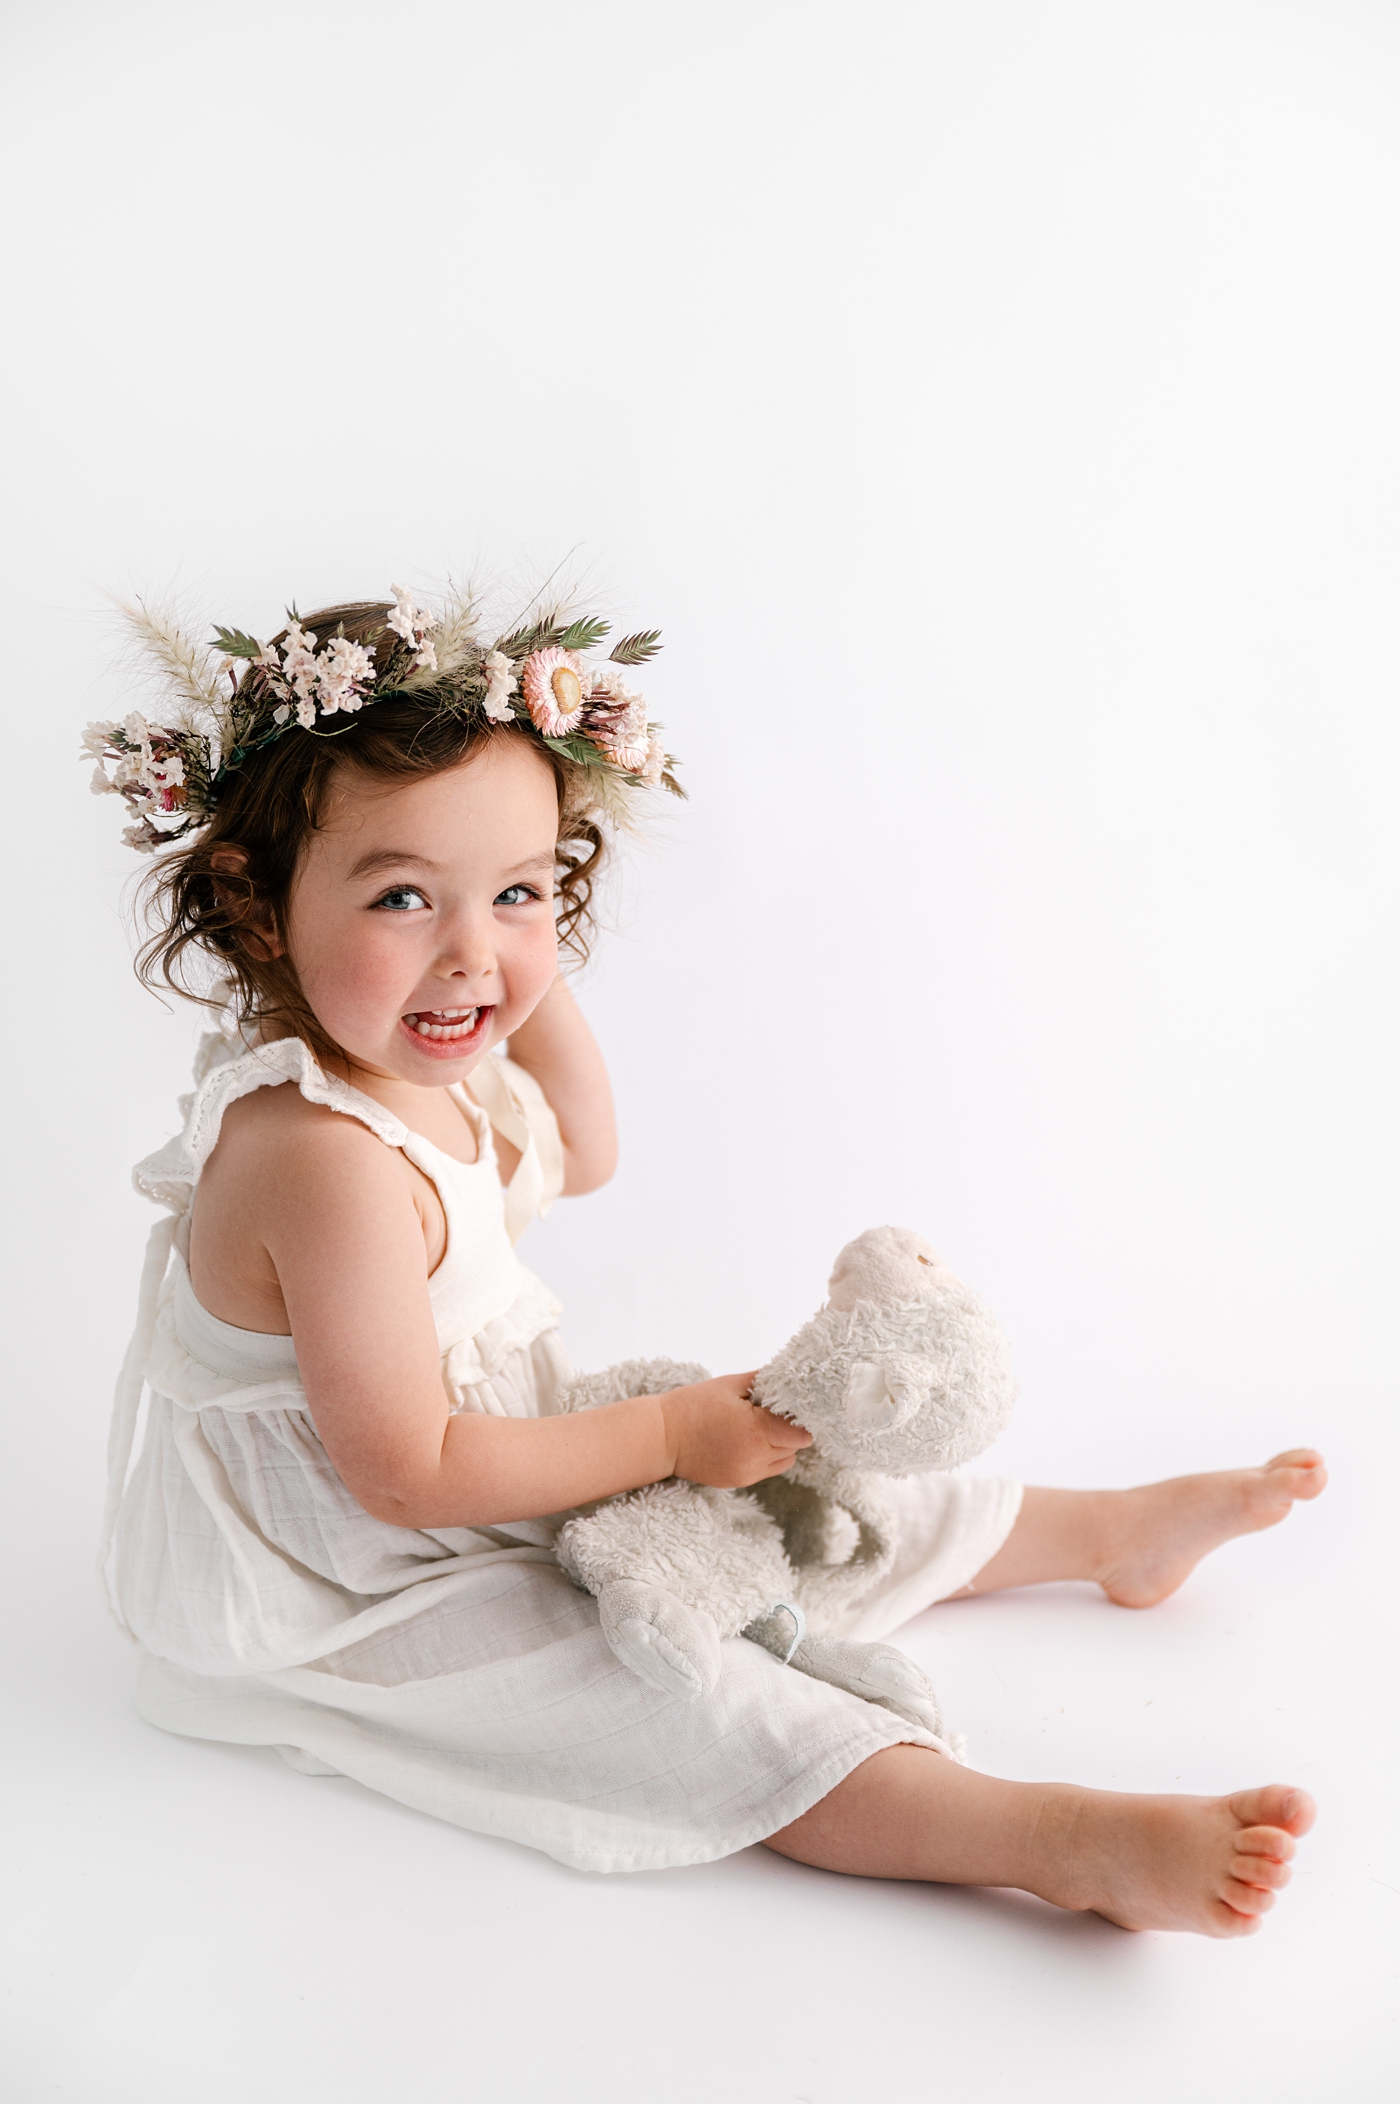 Little girl smiles holding lamb stuffed animal while wearing floral crown. Photo by Meg Newton Photography.